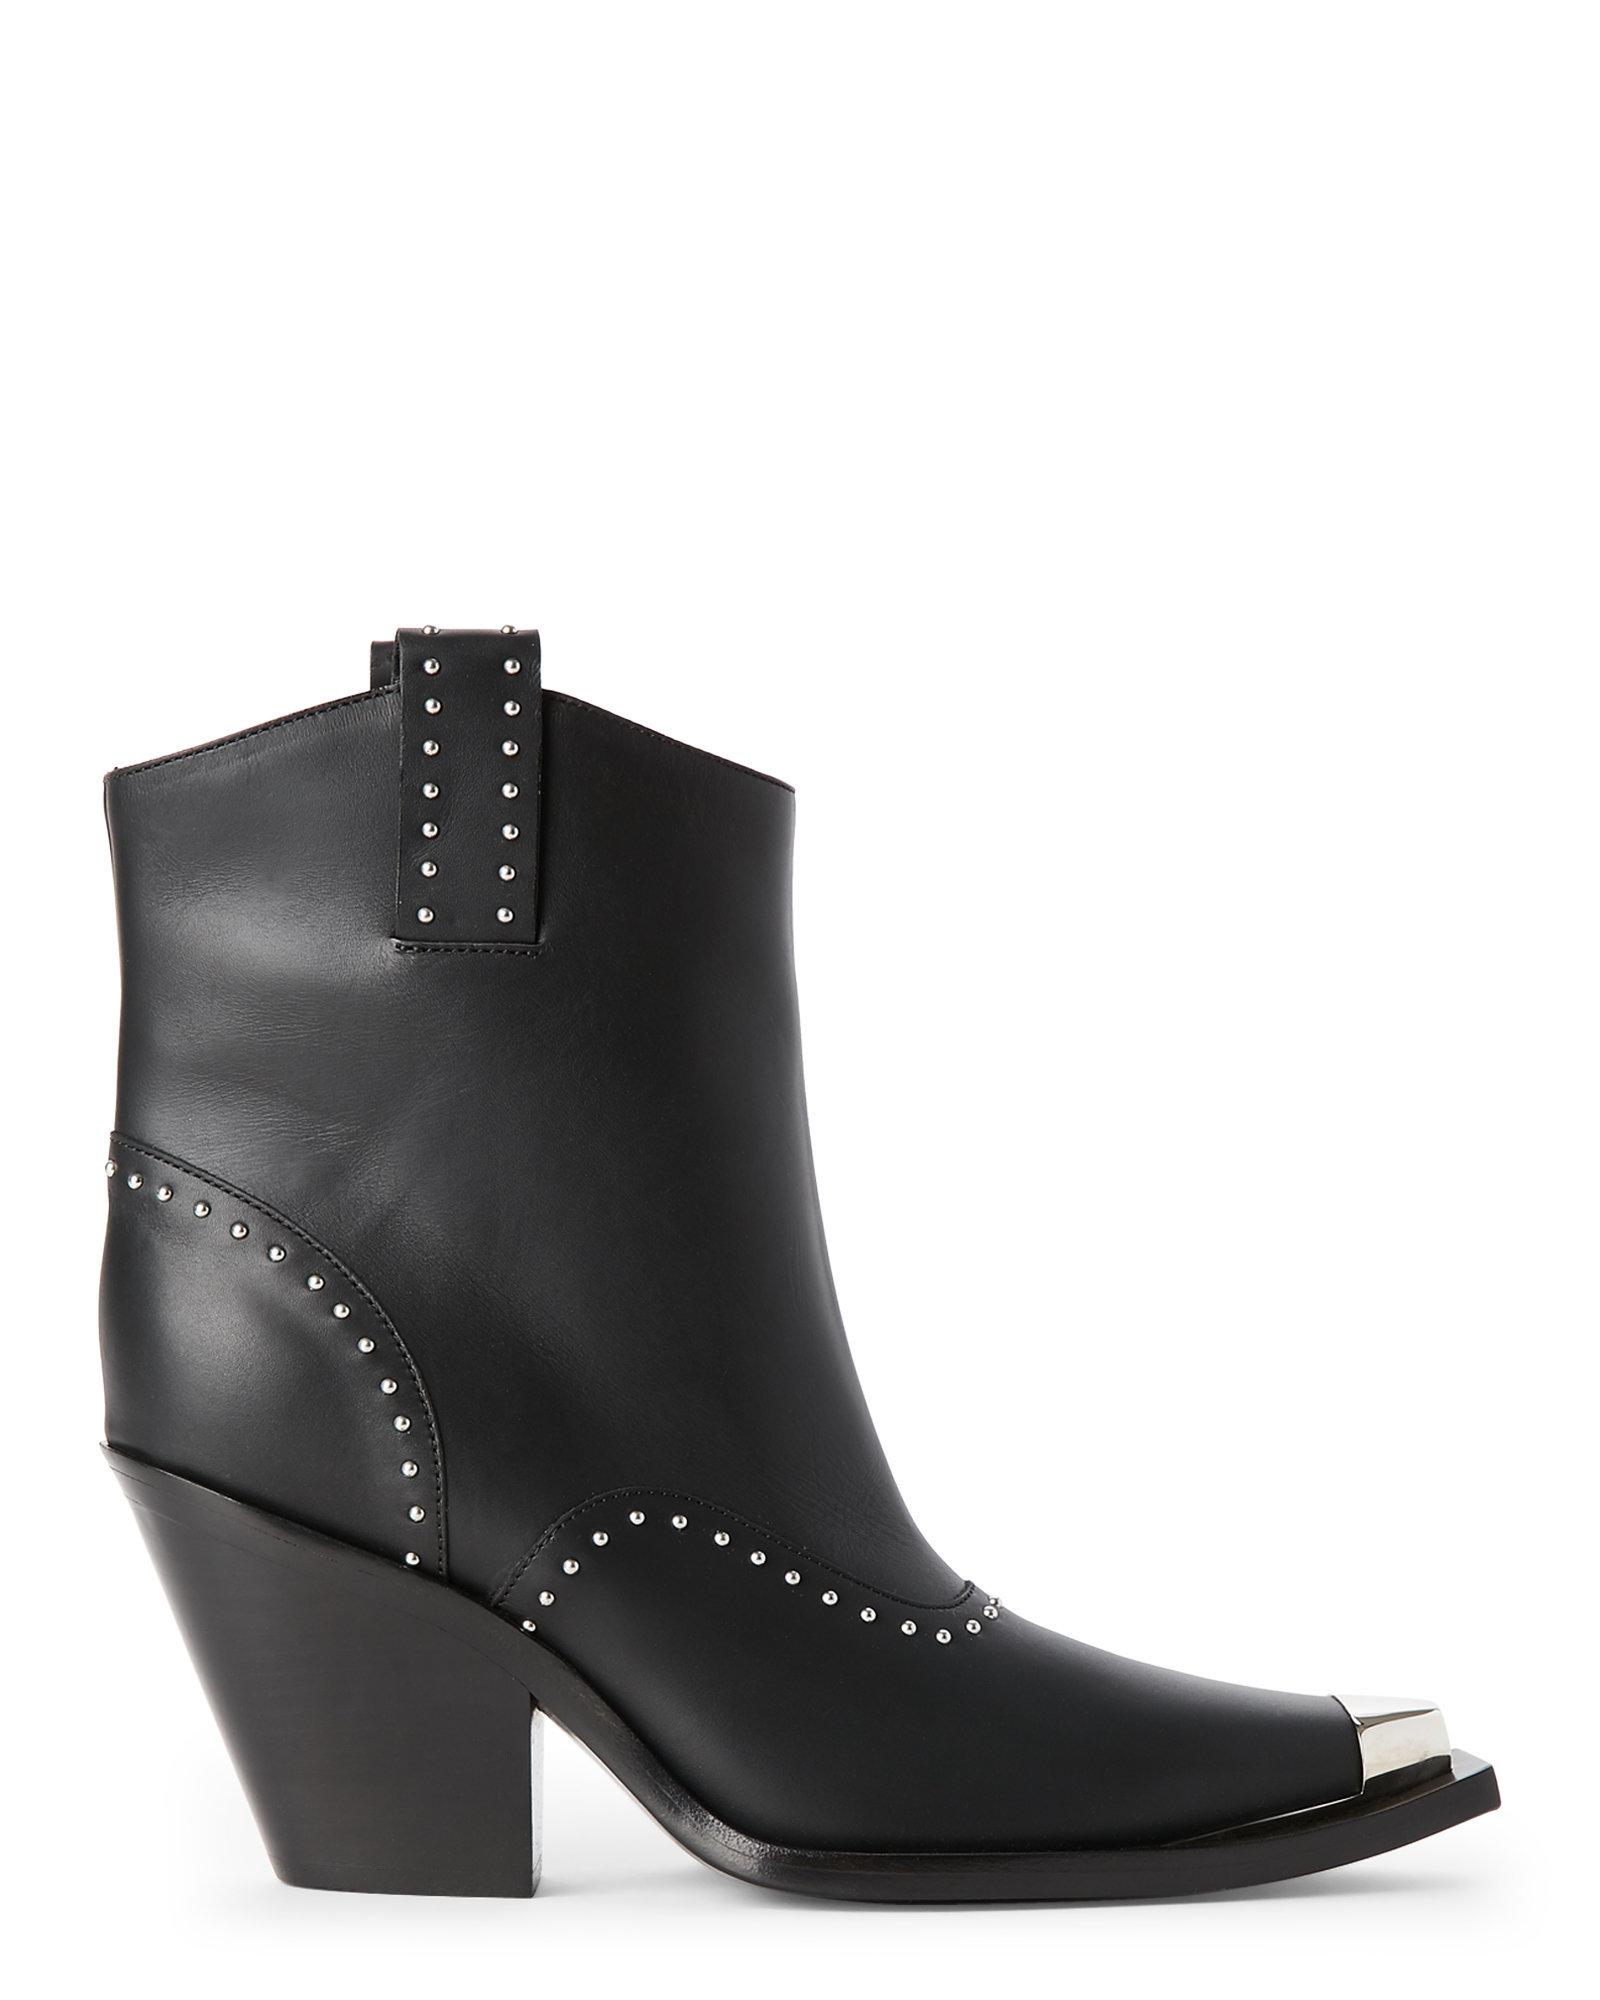 Givenchy Embellished Leather Cowboy Boots in Black - Lyst